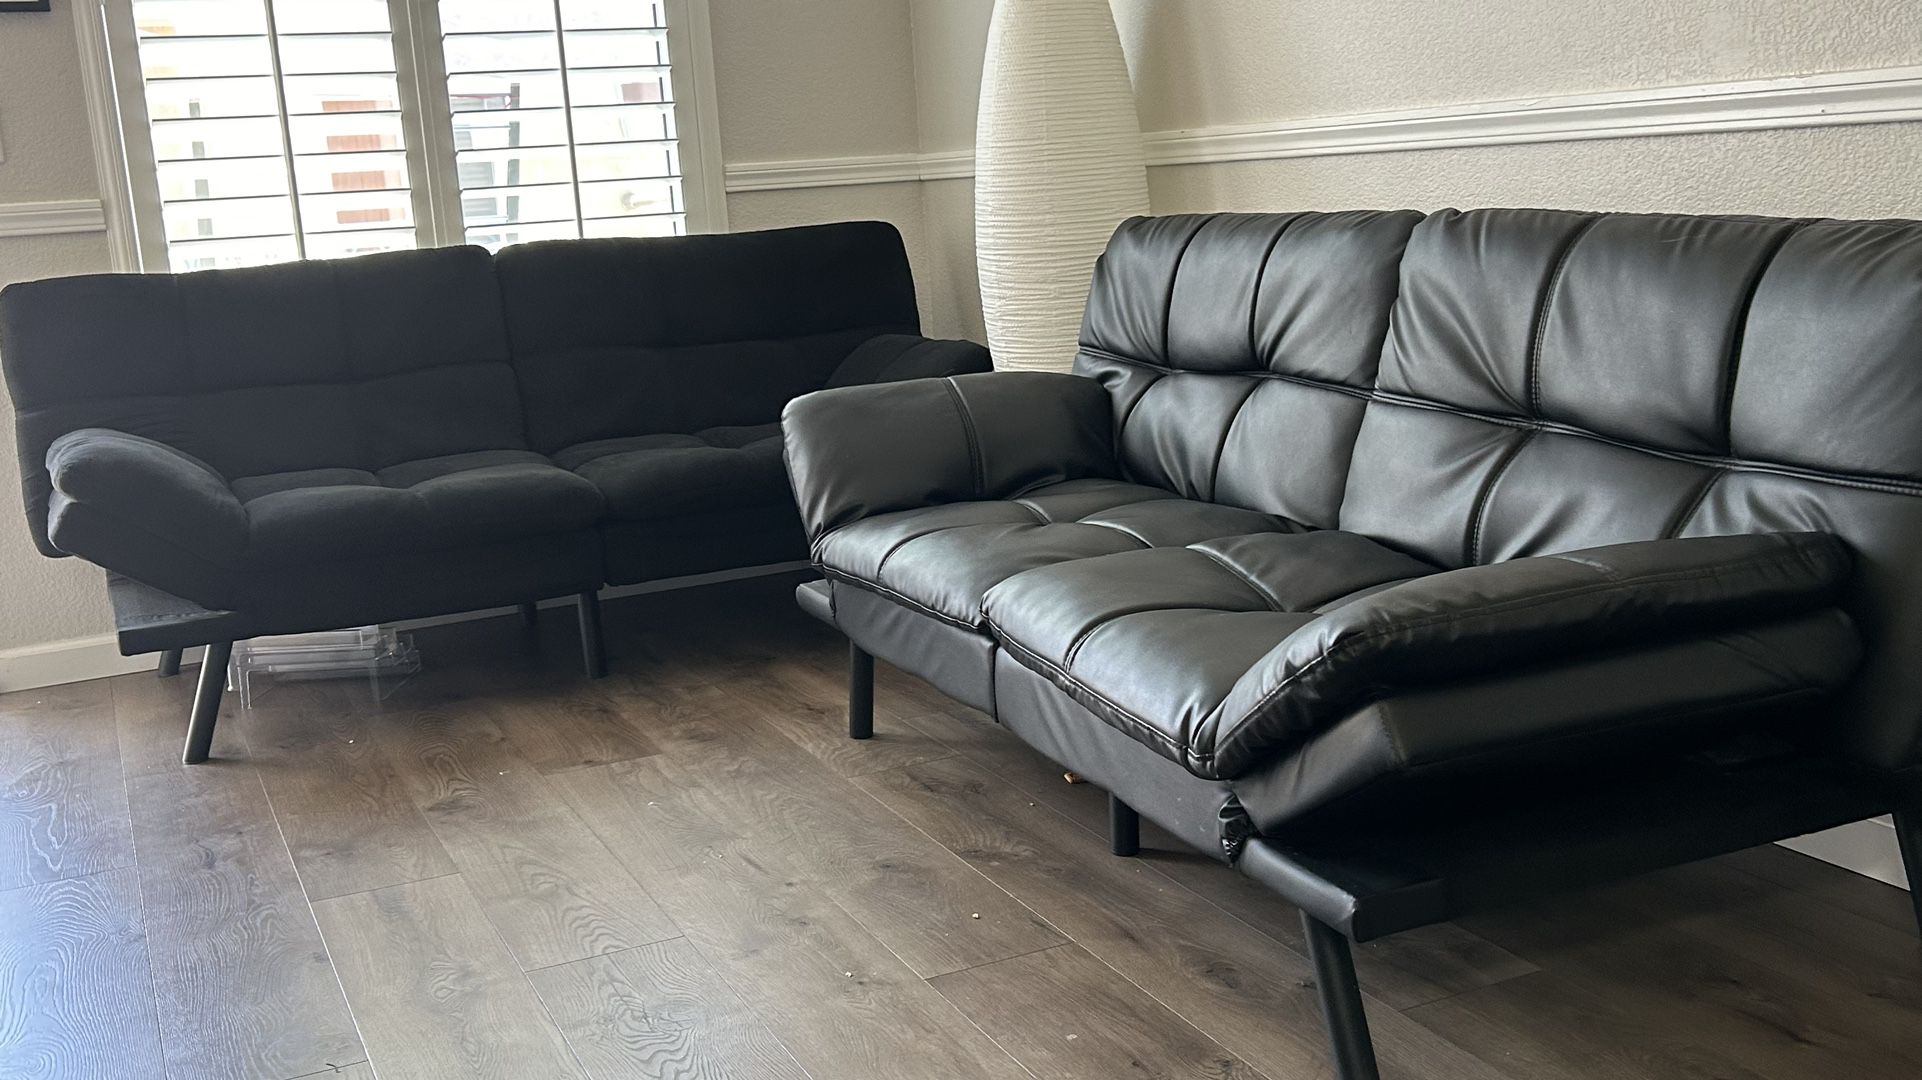 2 x Sofa on sale (1 Leather, 1 Suede)